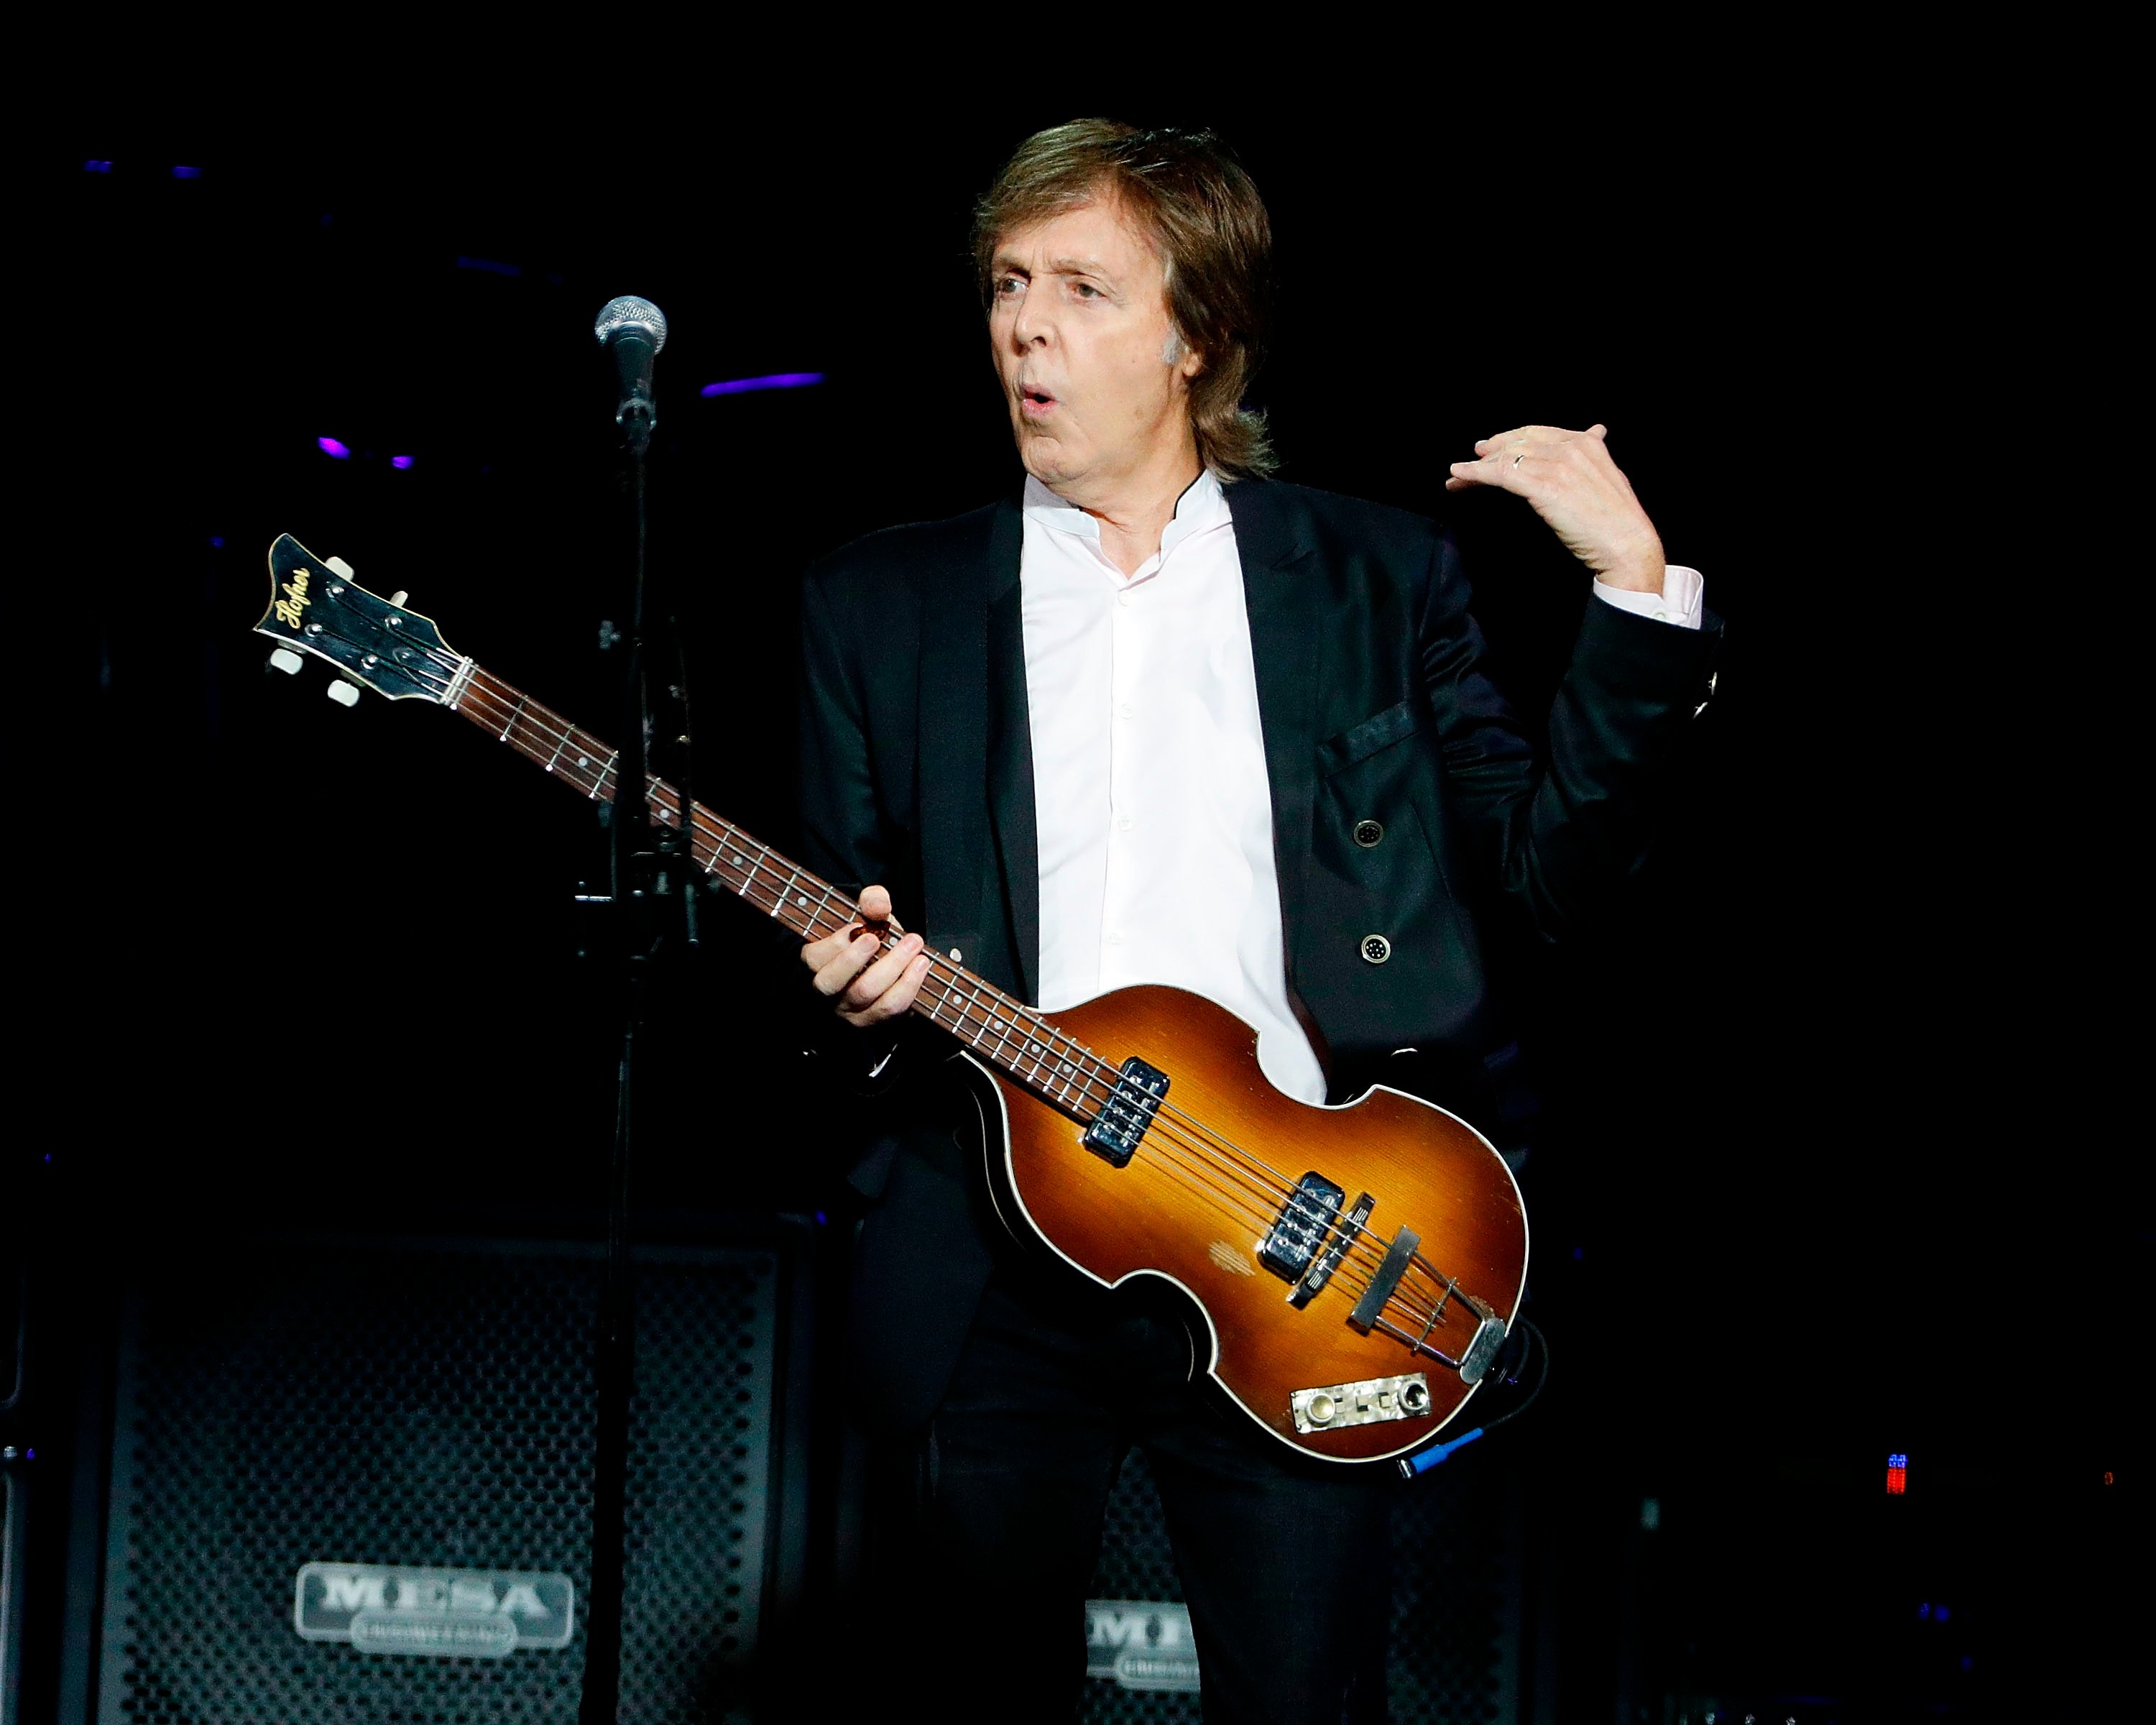 Paul McCartney performs at the Barclays Center in New York City